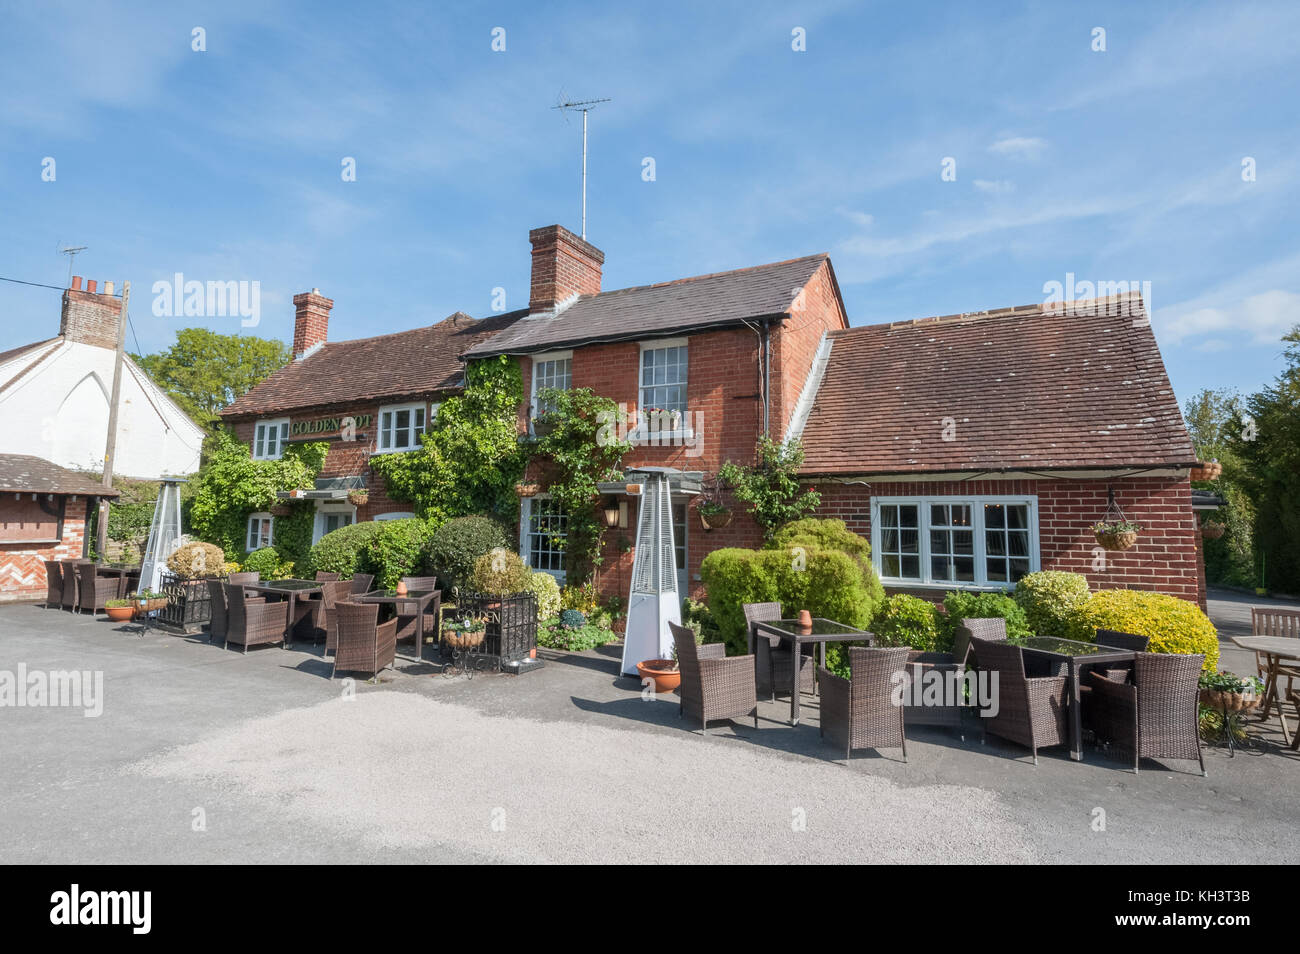 Eversley, UK - May 10, 2017: The Golden Pot is an old traditional English pub dating back over 350 years and is in the picturesque village of Eversley Stock Photo